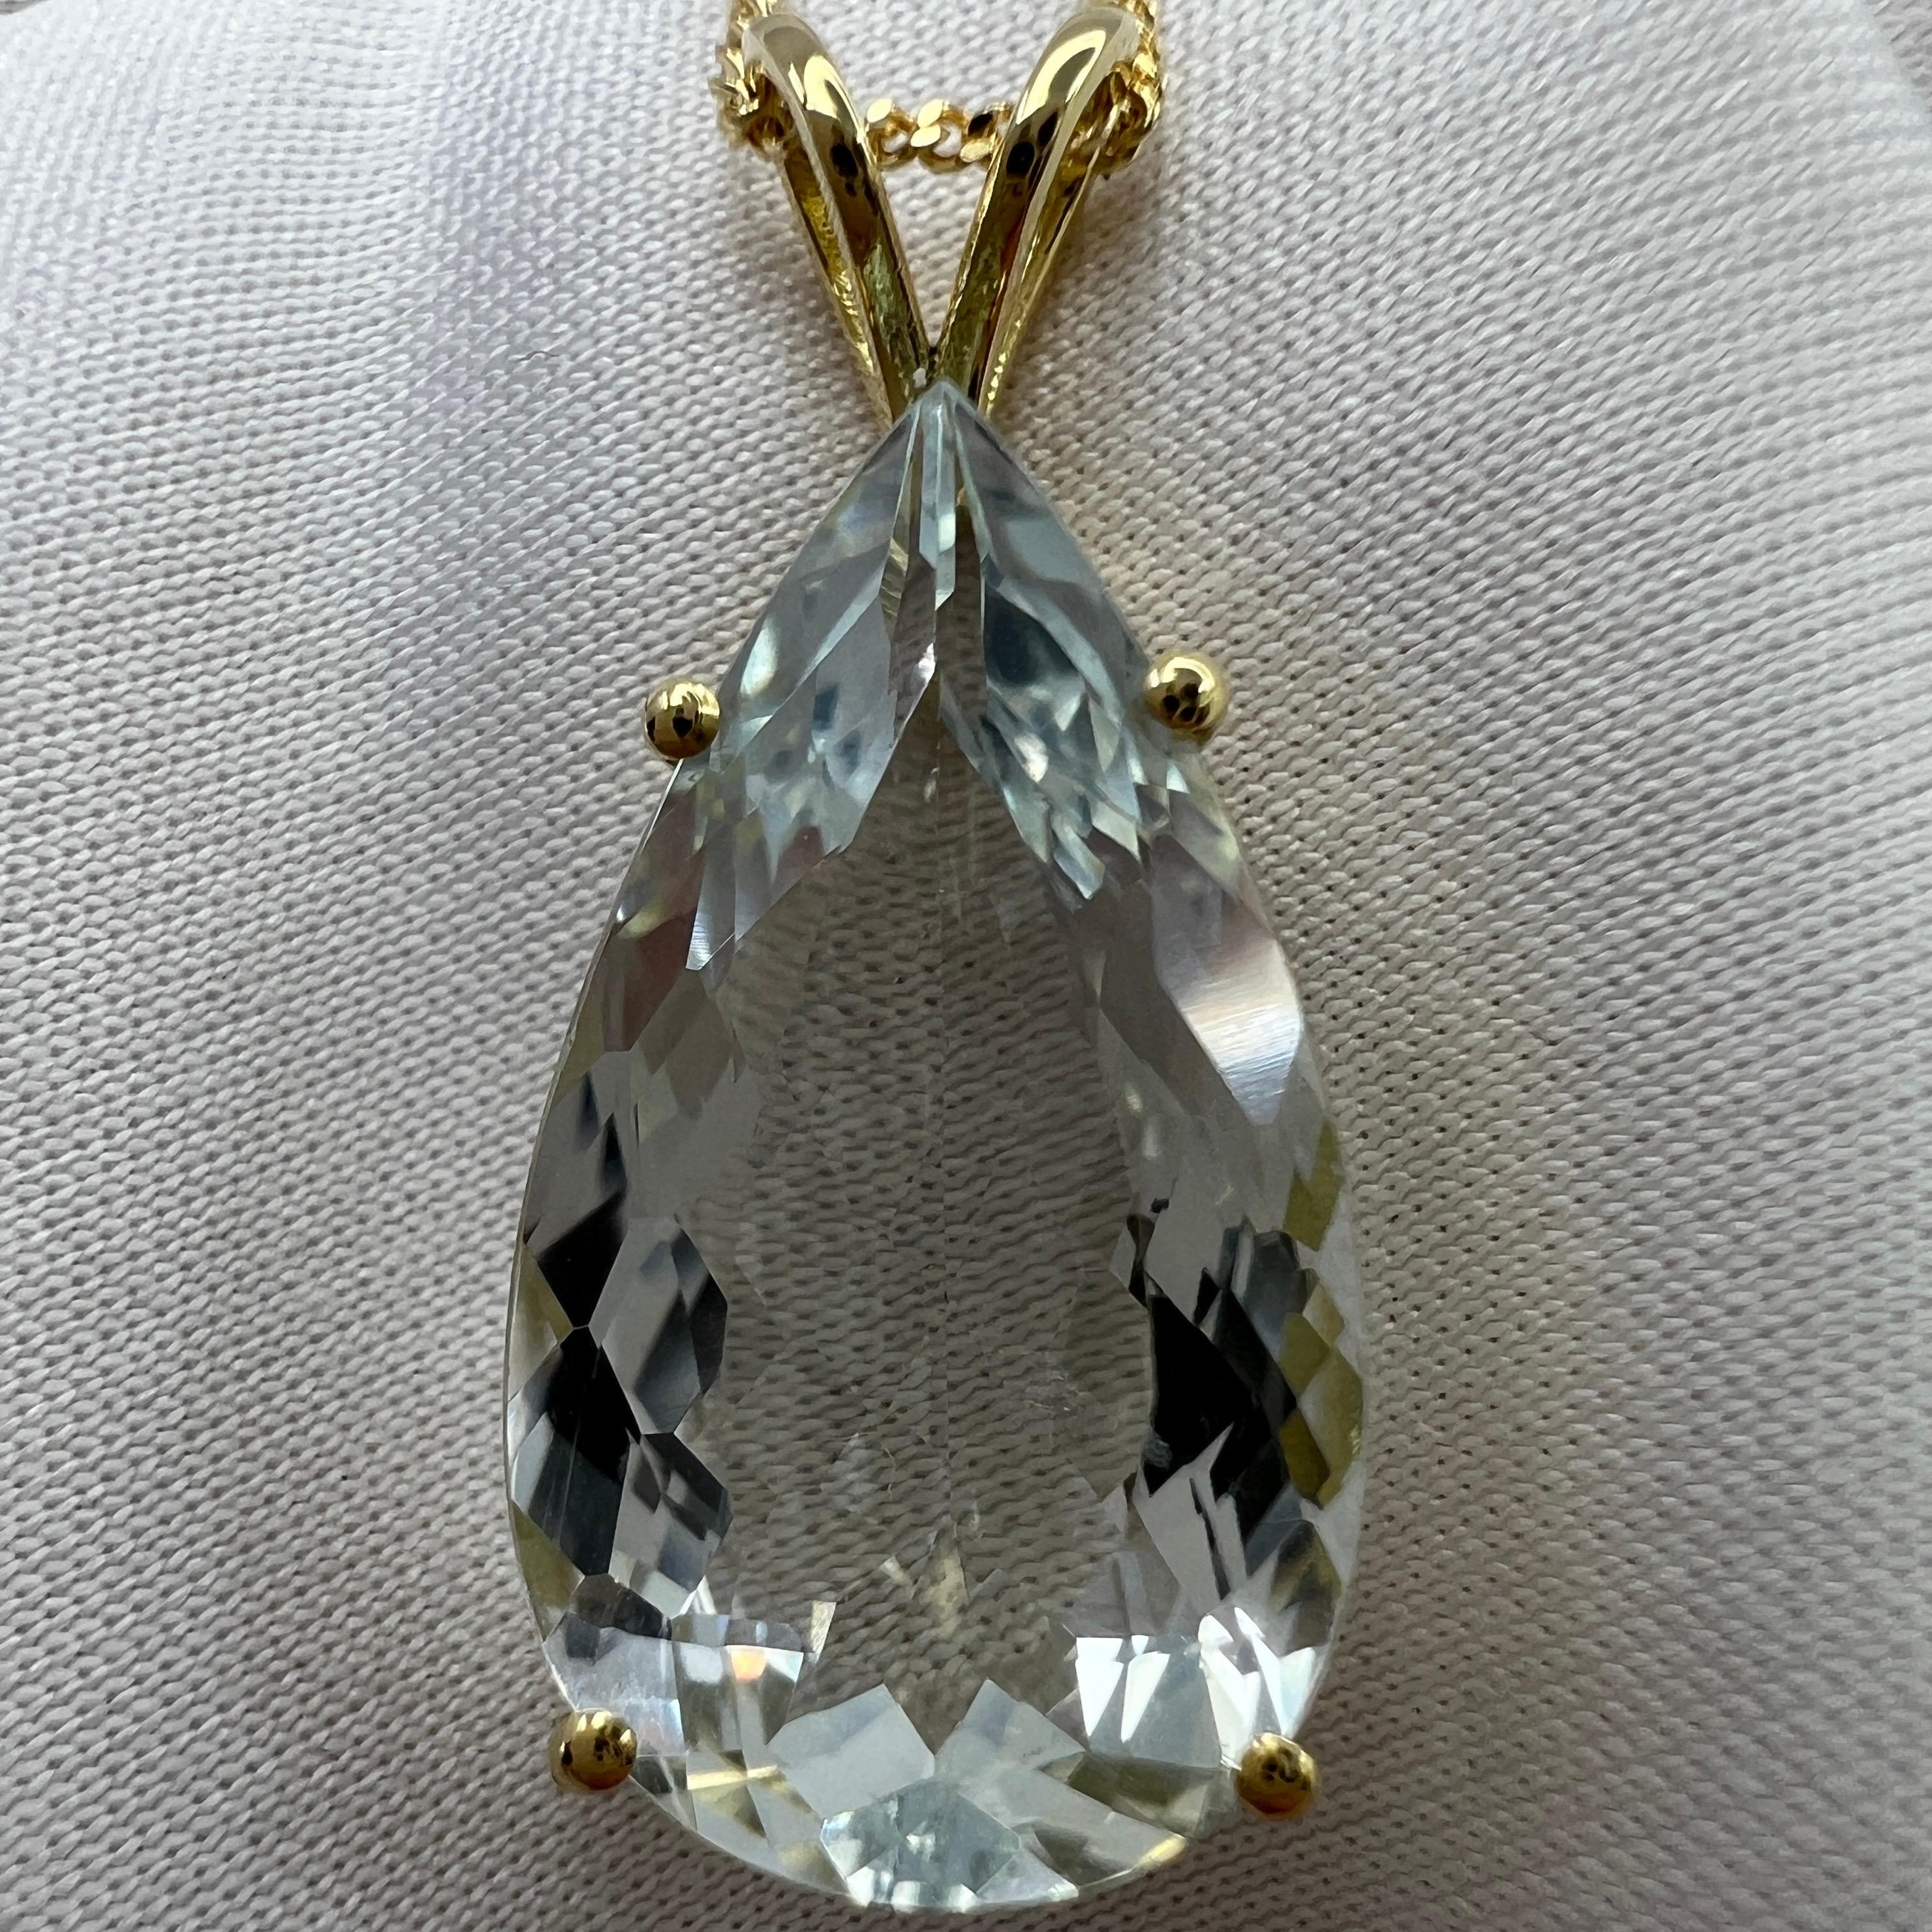 Natural Light Blue Aquamarine Pendant Necklace.

7.64 Carat aquamarine with a stunning light blue colour set in a fine 18k yellow gold solitaire pendant.

The aquamarine has an excellent pear teardrop cut showing lots of brightness and light return.